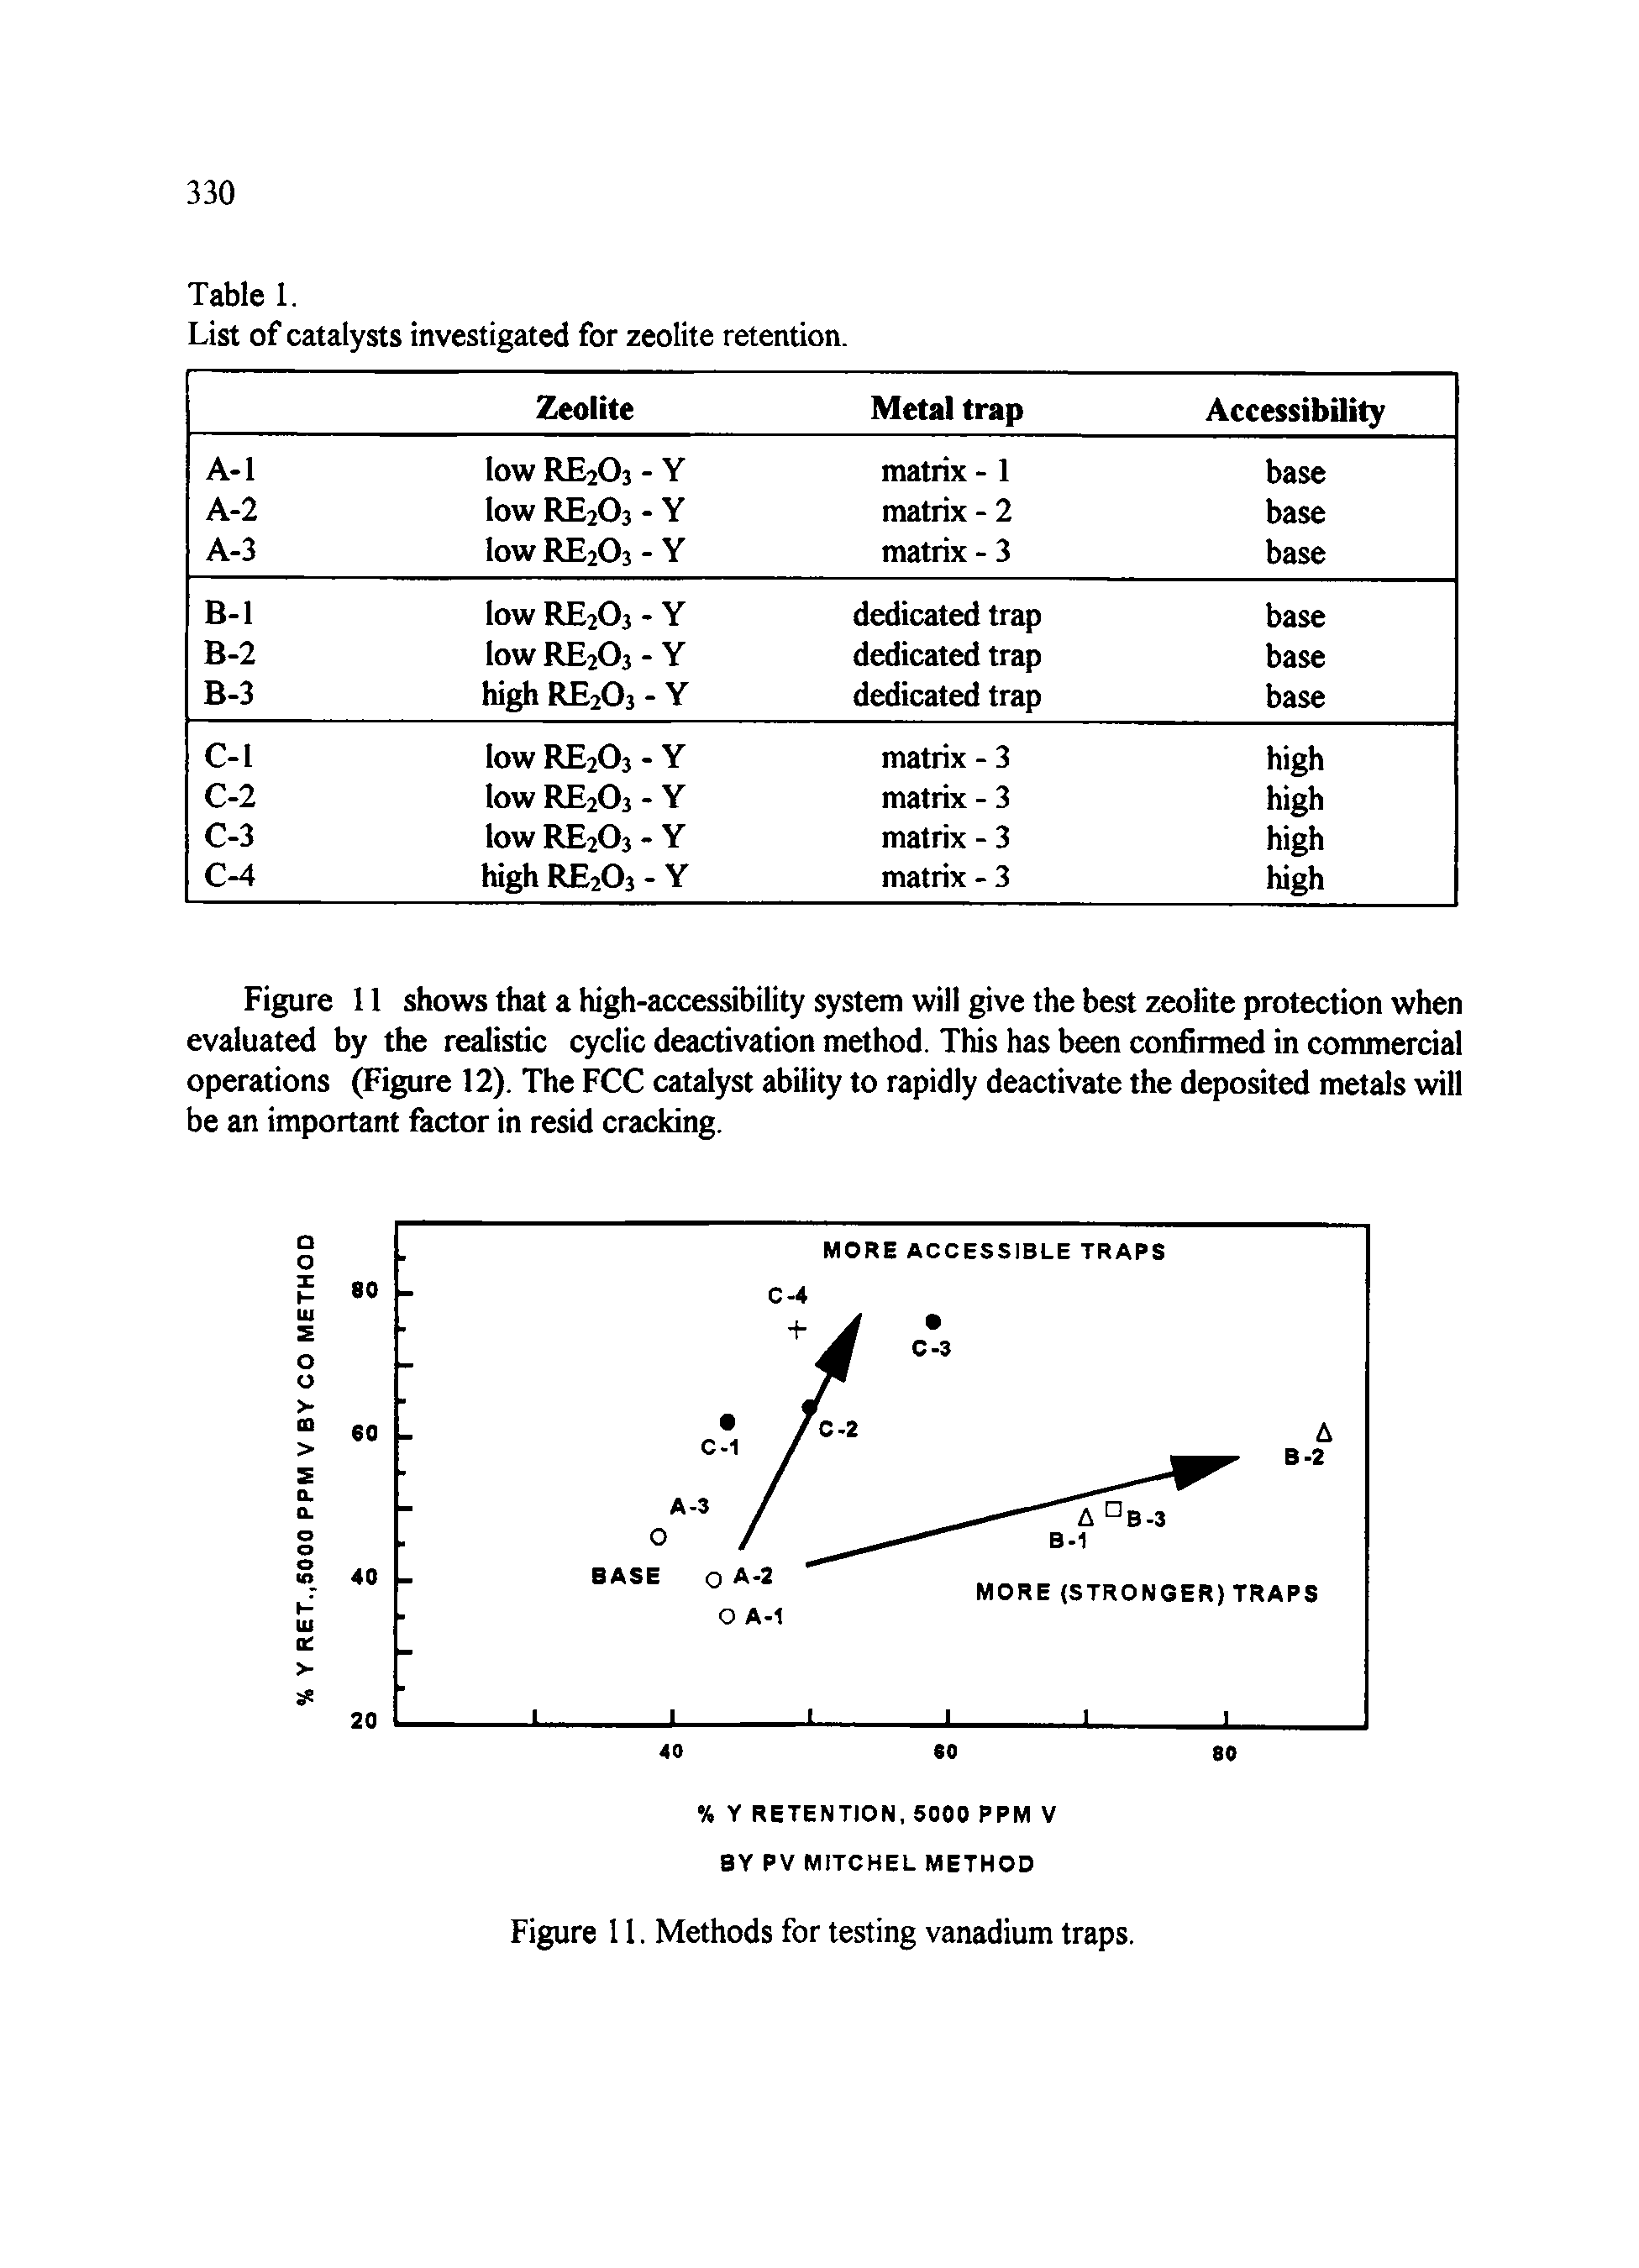 Figure 11 shows that a high-accessibility system will give the best zeolite protection when evaluated by the realistic cyclic deactivation method. This has been confirmed in commercial operations (Figure 12). The FCC catalyst ability to rapidly deactivate the deposited metals will be an important factor in resid cracking.